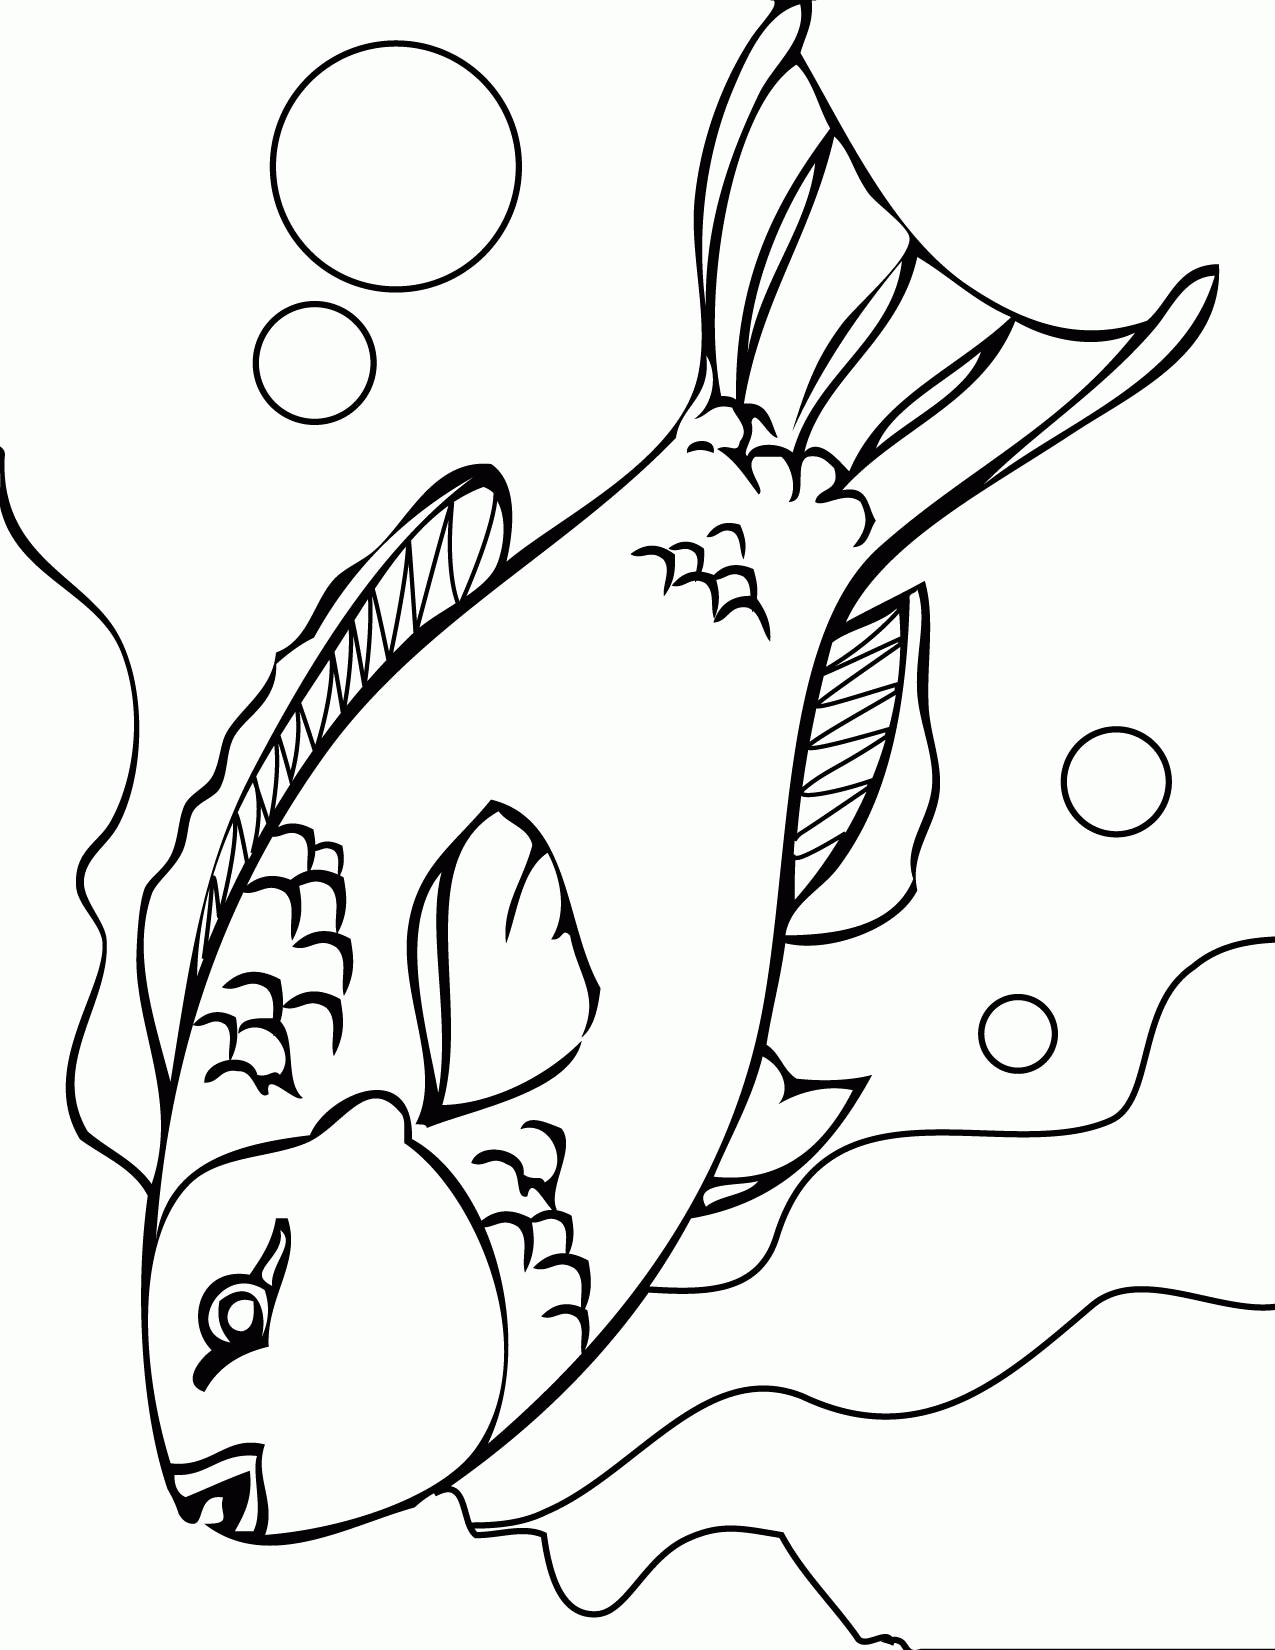 Parrotfish Coloring Page - Handipoints